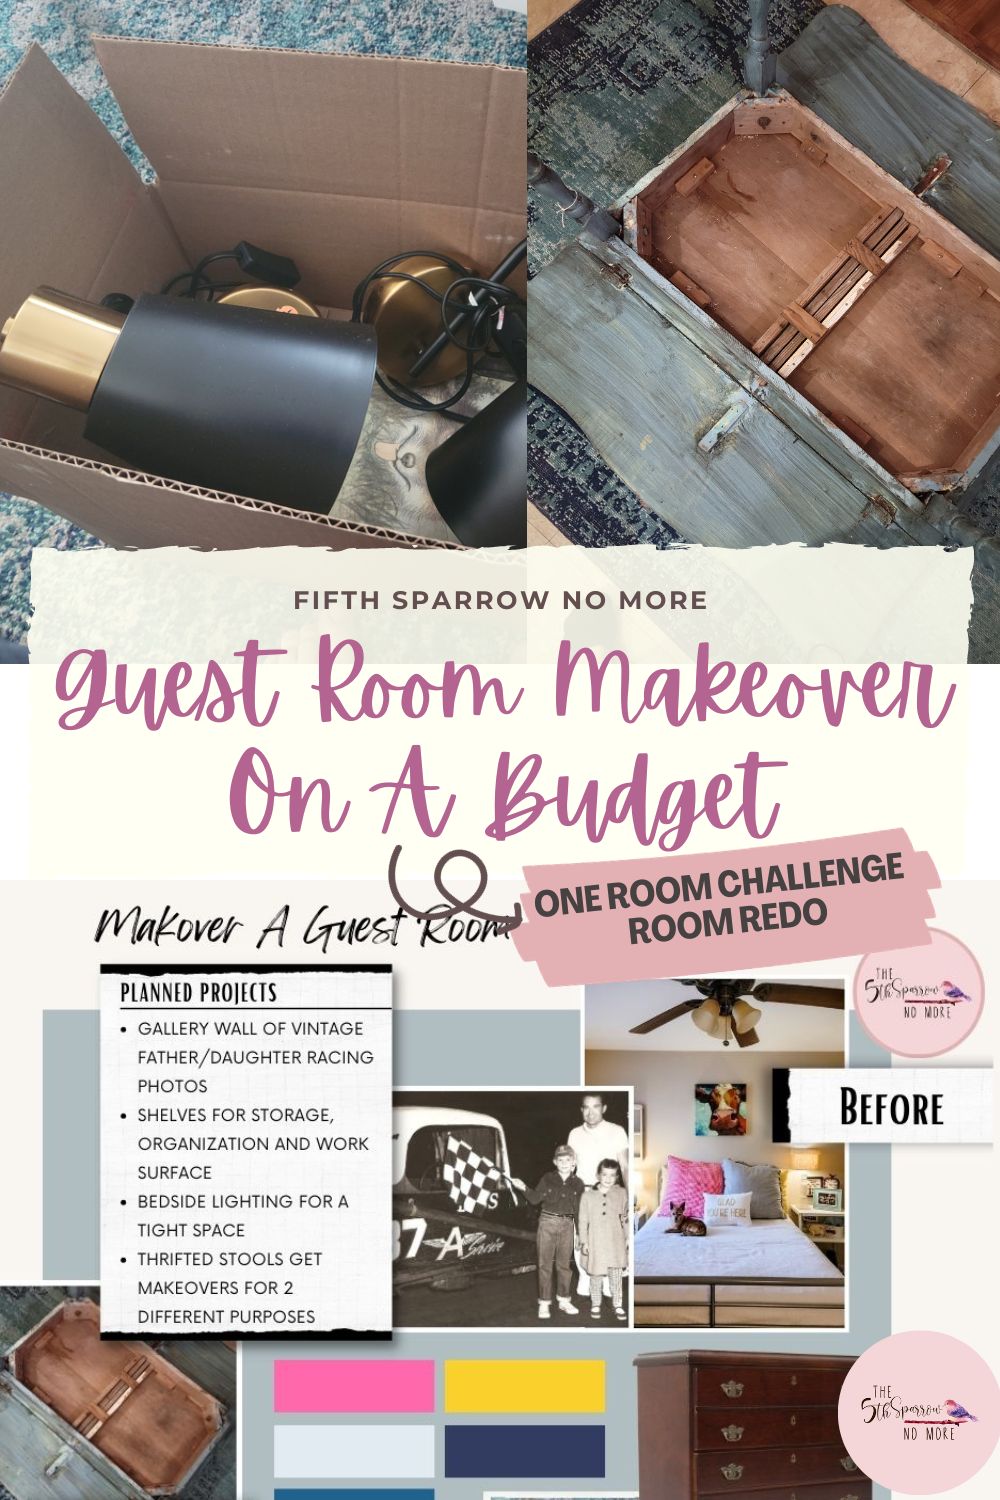 I'll share my guest room ideas and projects for the guest bedroom makeover plans for the One Room Challenge. 